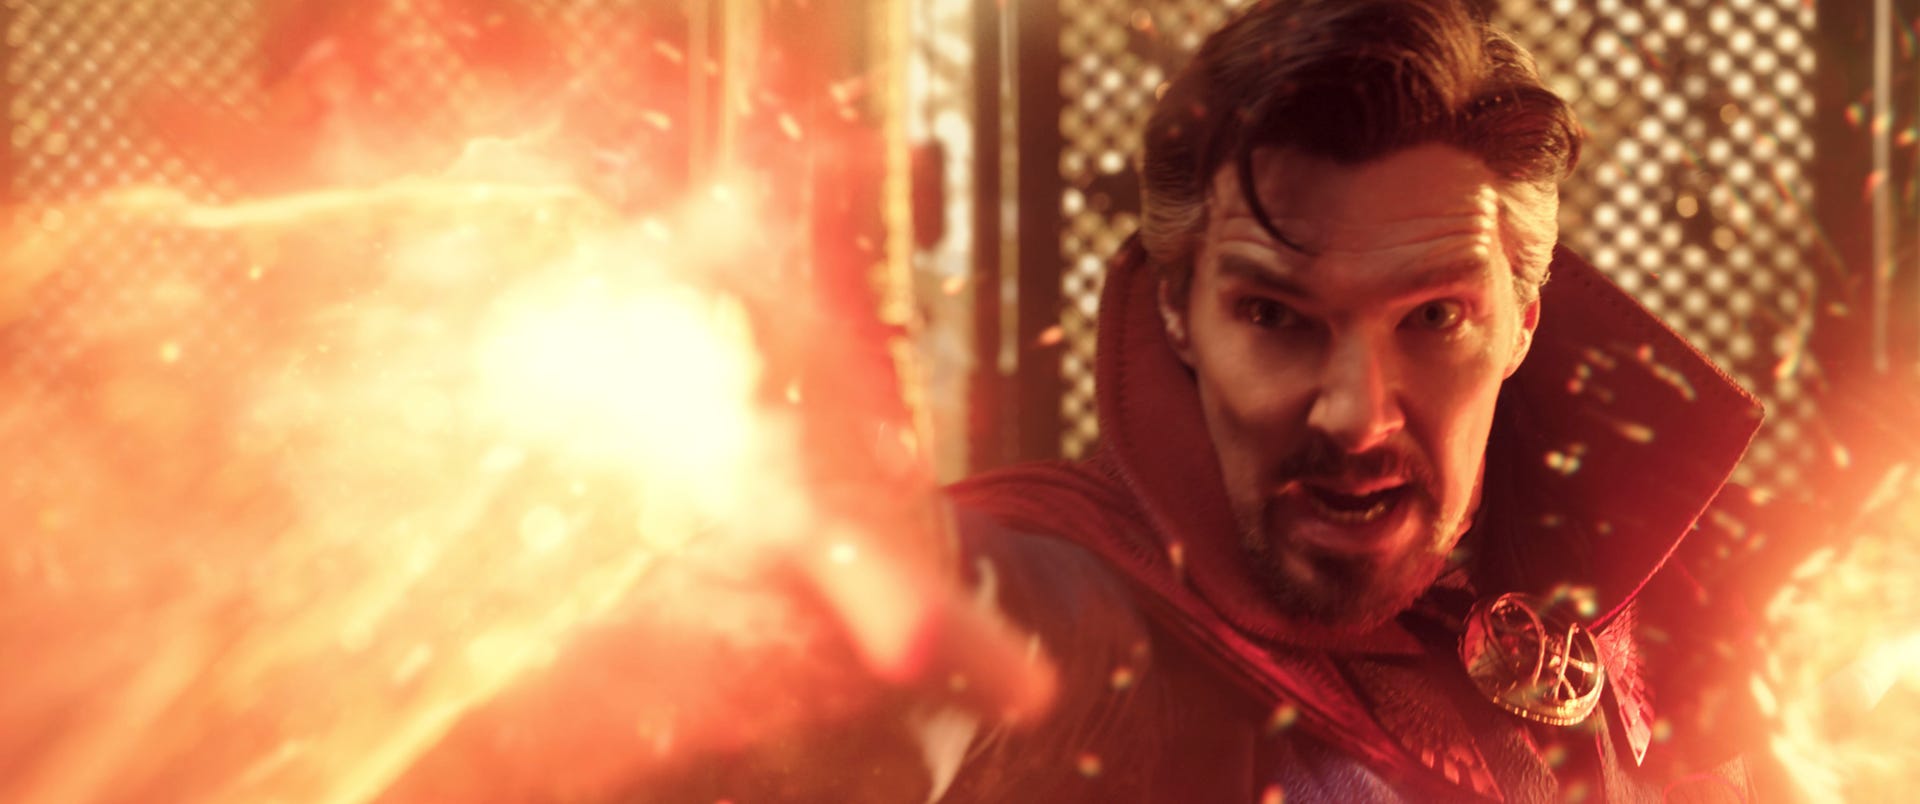 Benedict Cumberbatch shoots magic light from his hands in Marvel's Doctor Strange in the Multiverse of Madness.